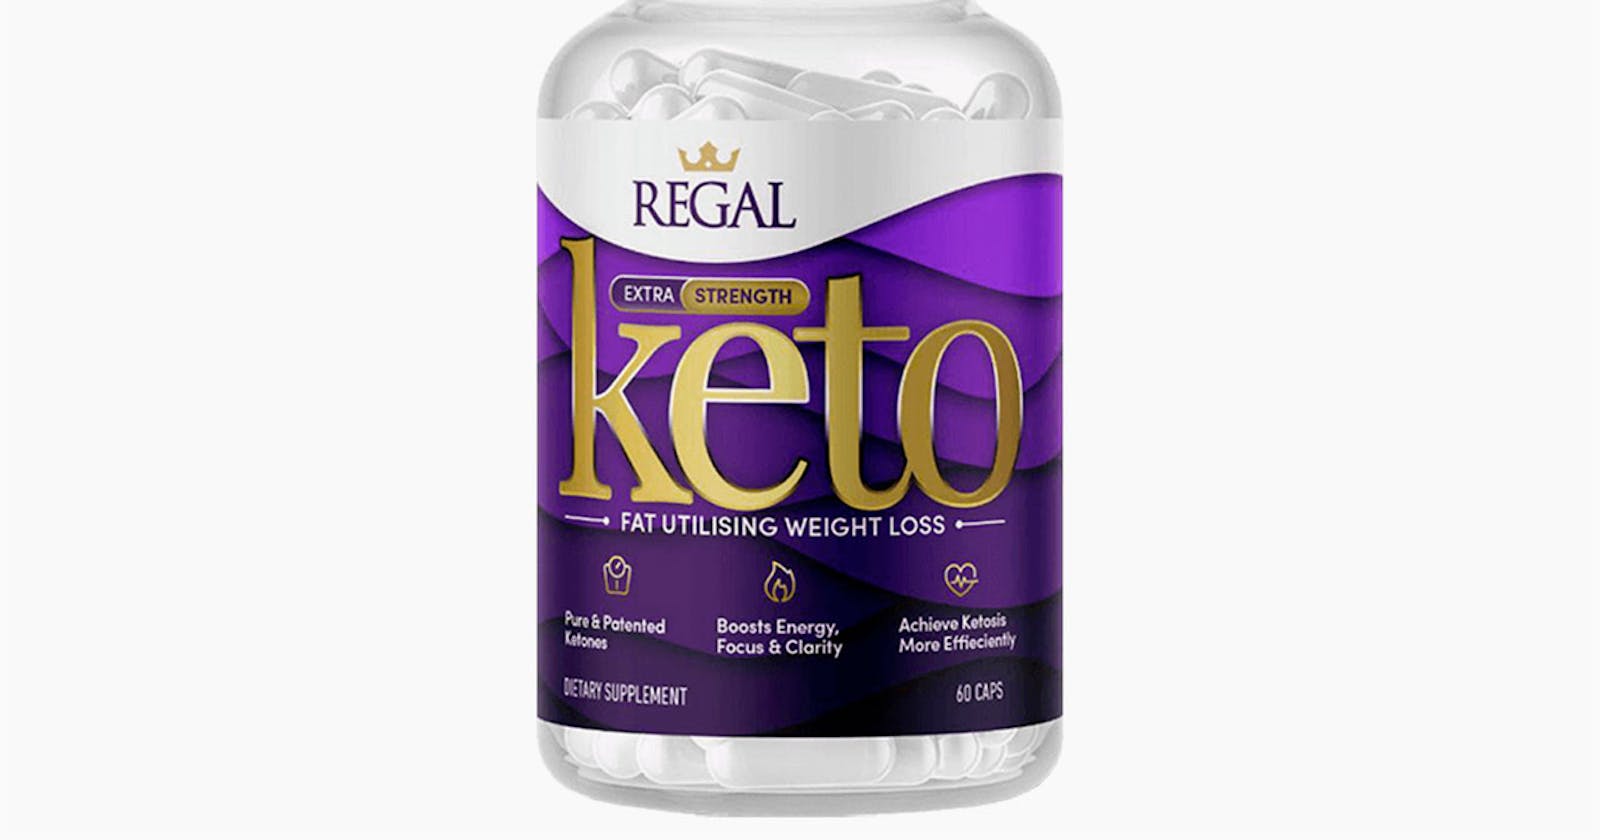 Royal Apple Keto Gummies Reviews - SCAM Exposed! Shocking User Warning Issued